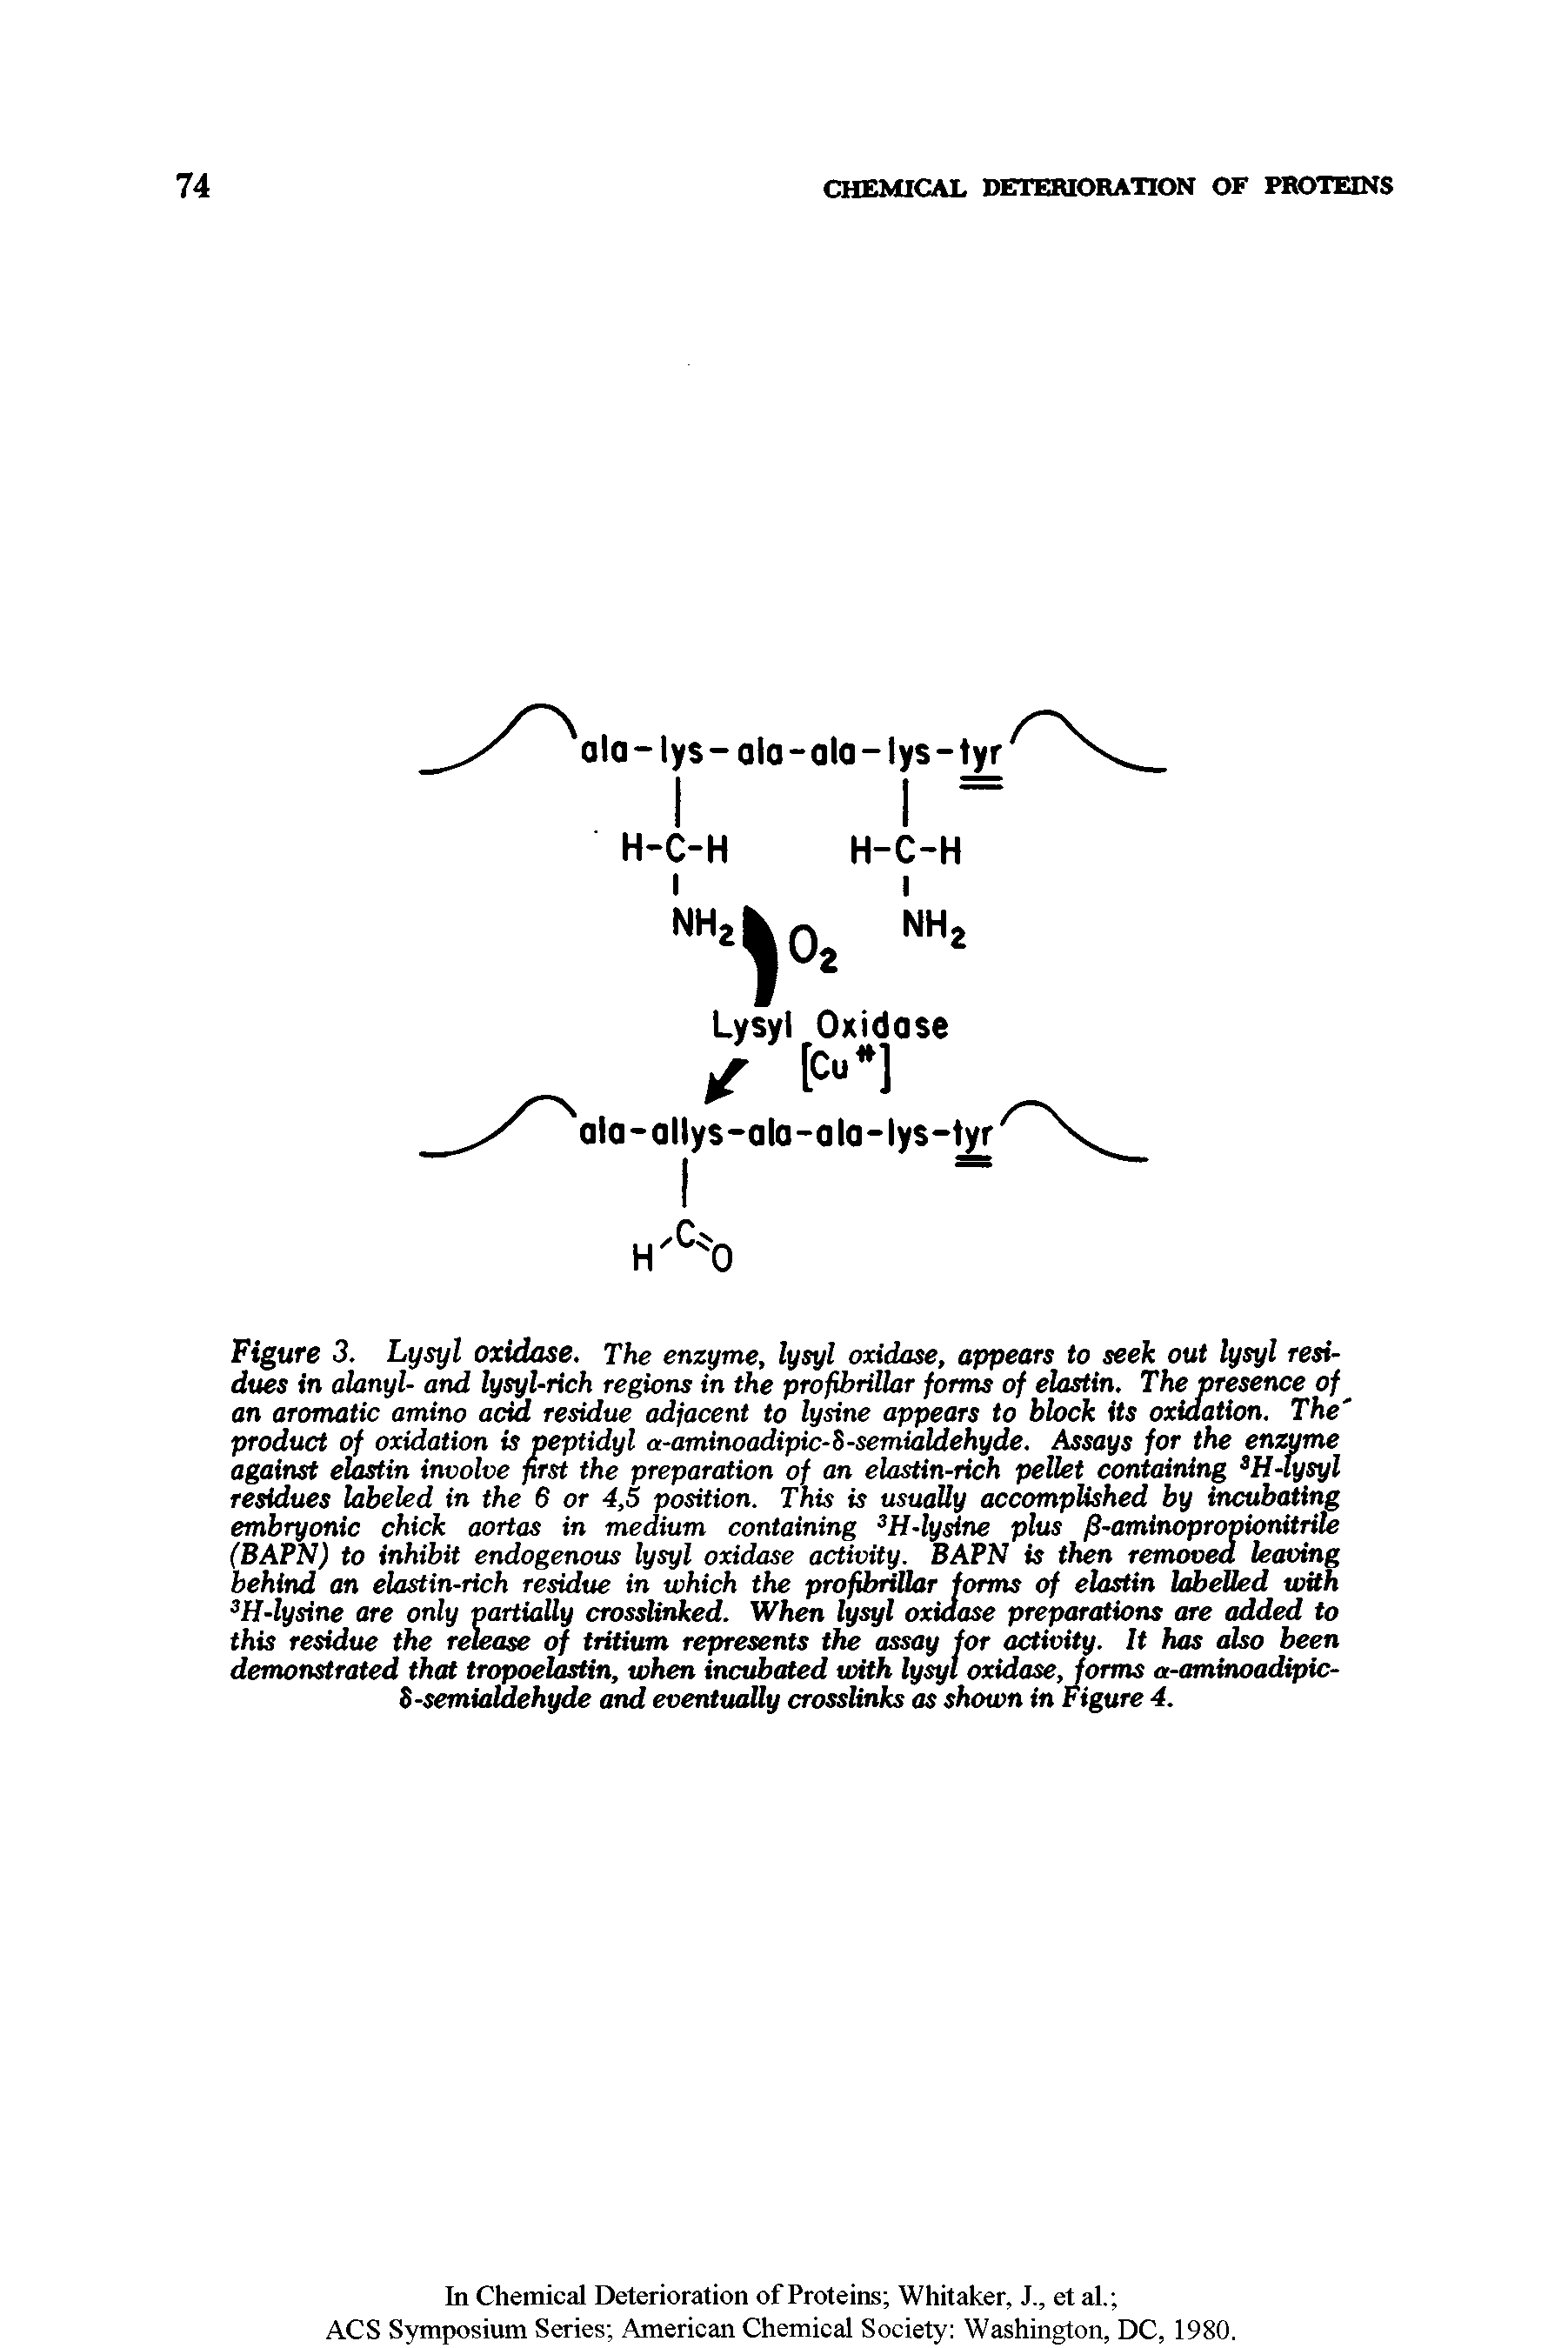 Figure 3. Lysyl oxidase. The enzyme, lysyl oxidase, appears to seek out lysyl residues in alanyl- and lysyl-rich regions in the pro fibrillar forms of elastin. The presence of an aromatic amino acid residue adjacent to lysine appears to block its oxidation. The product of oxidation is peptidyl a-aminoadipic-S-semialdehyde. Assays for the enzyme against elastin involve first the preparation of an elastin-rich pellet containing 3H-lysyl residues labeled in the 6 or 4,5 position. This is usually accomplished by incubating embryonic chick aortas in medium containing 3H-lysine plus f3-aminopropionitrile (BAPN) to inhibit endogenous lysyl oxidase activity. BAPN is then removed leaving behind an elastin-rich residue in which the profibrillar forms of elastin labelled with 3H-lysine are only partially crosslinked. When lysyl oxidase preparations are added to this residue the release of tritium represents the assay for activity. It has also been demonstrated that tropoelastin, when incubated with lysyl oxidase, forms a-aminoadipic-S-semialdehyde and eventually crosslinks as shown in Figure 4.